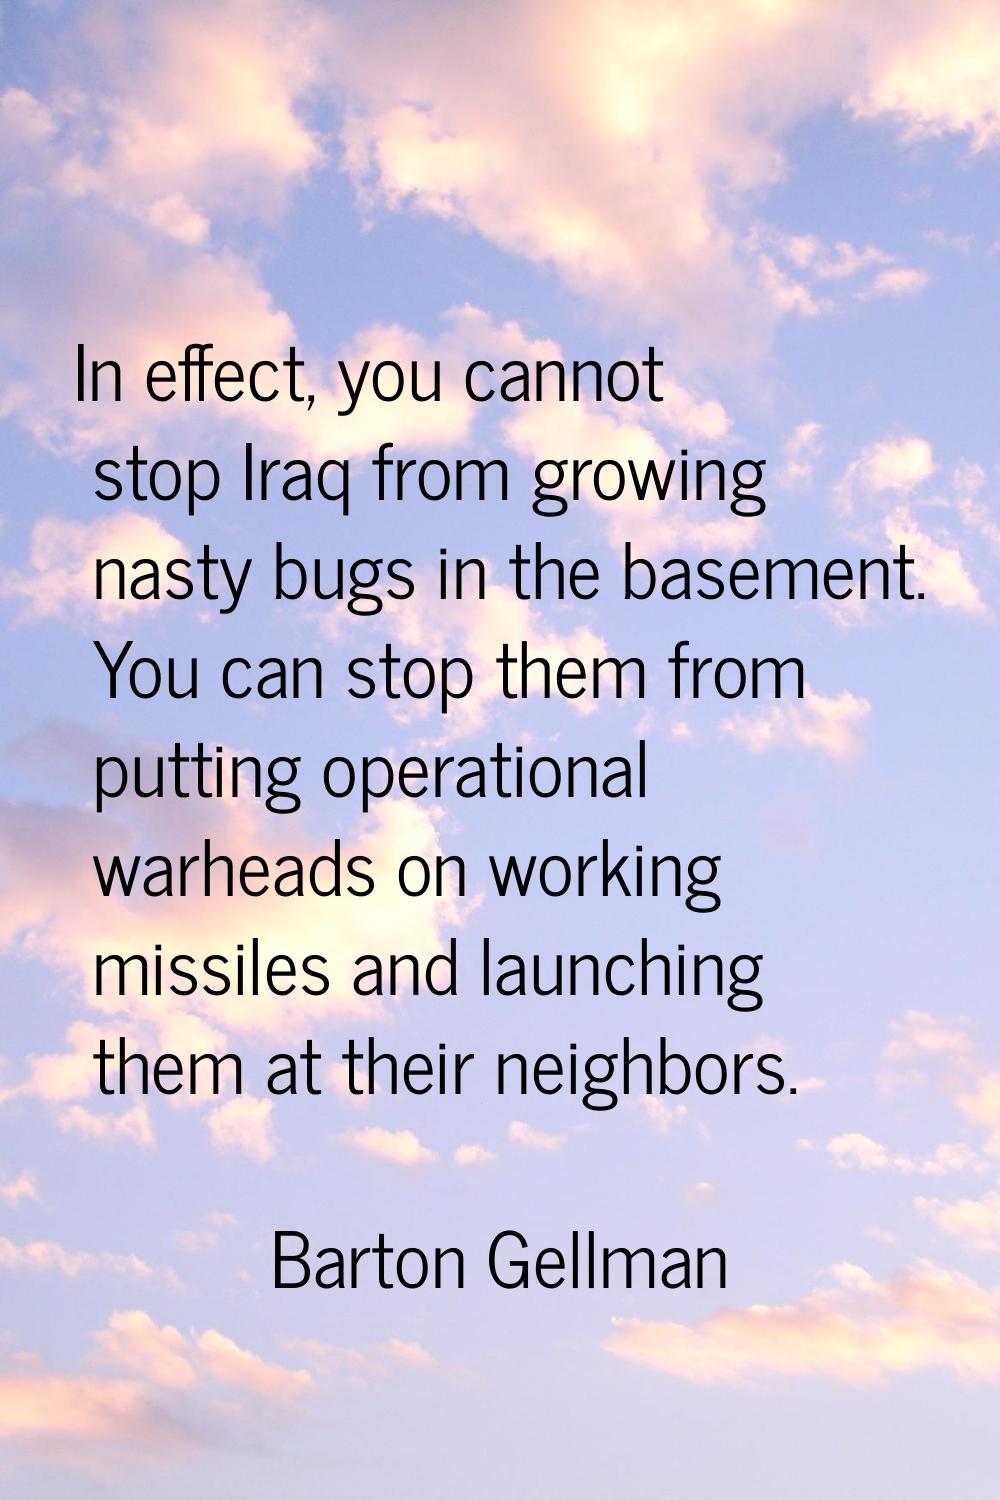 In effect, you cannot stop Iraq from growing nasty bugs in the basement. You can stop them from put